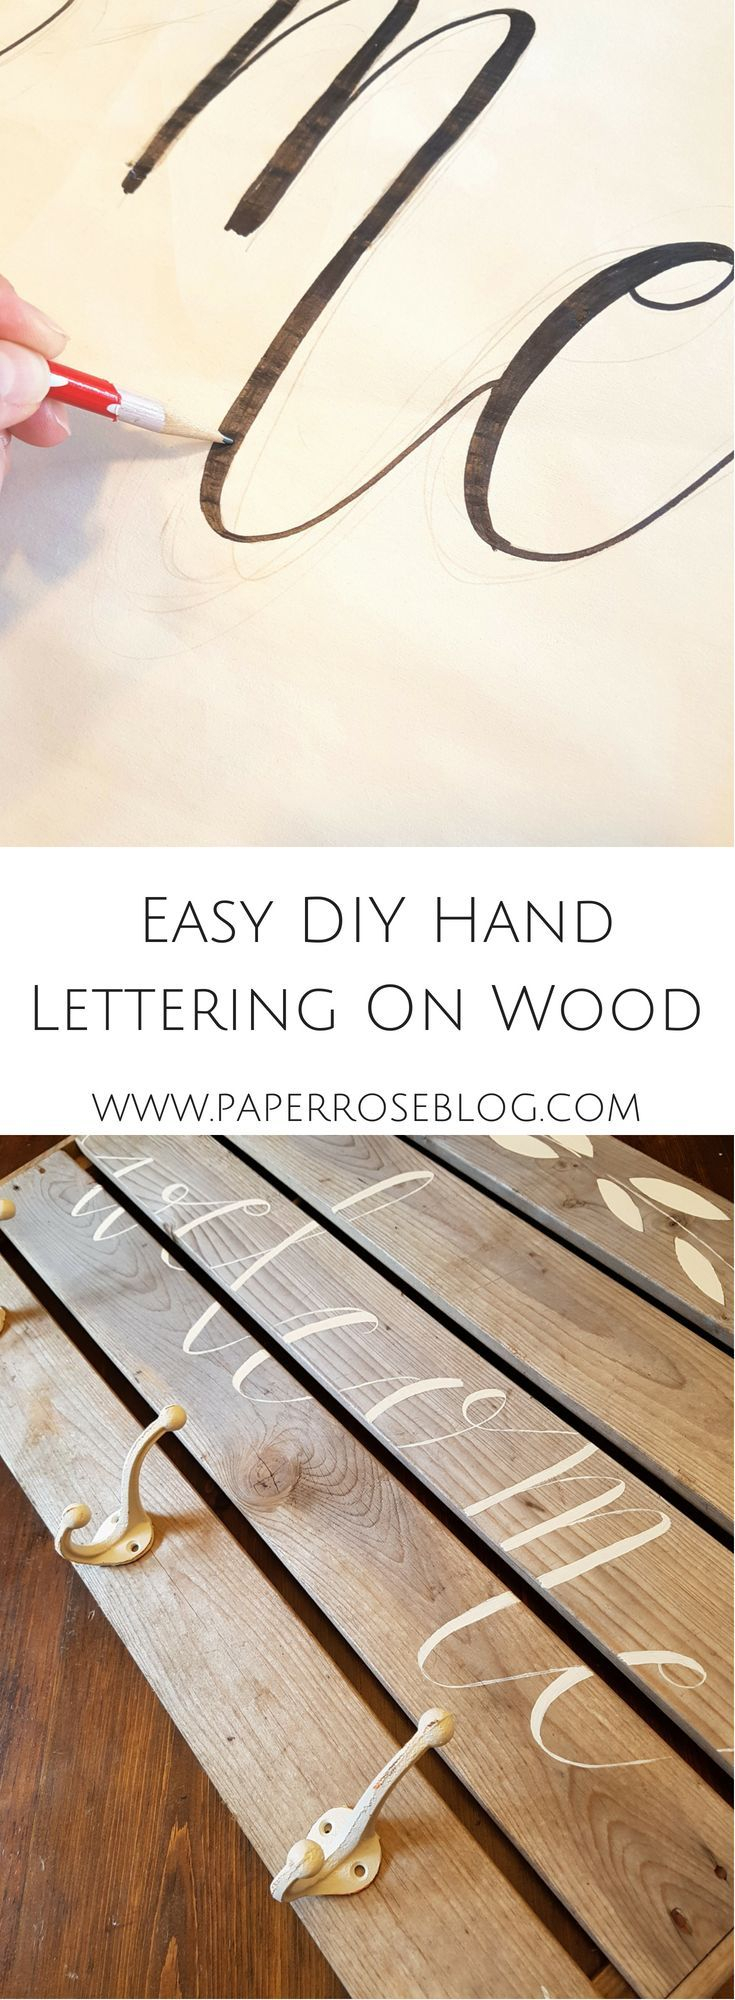 Easy Diy Lettering On Wood | Arts And Crafts | Woodworking within Tracing Letters Onto Wood